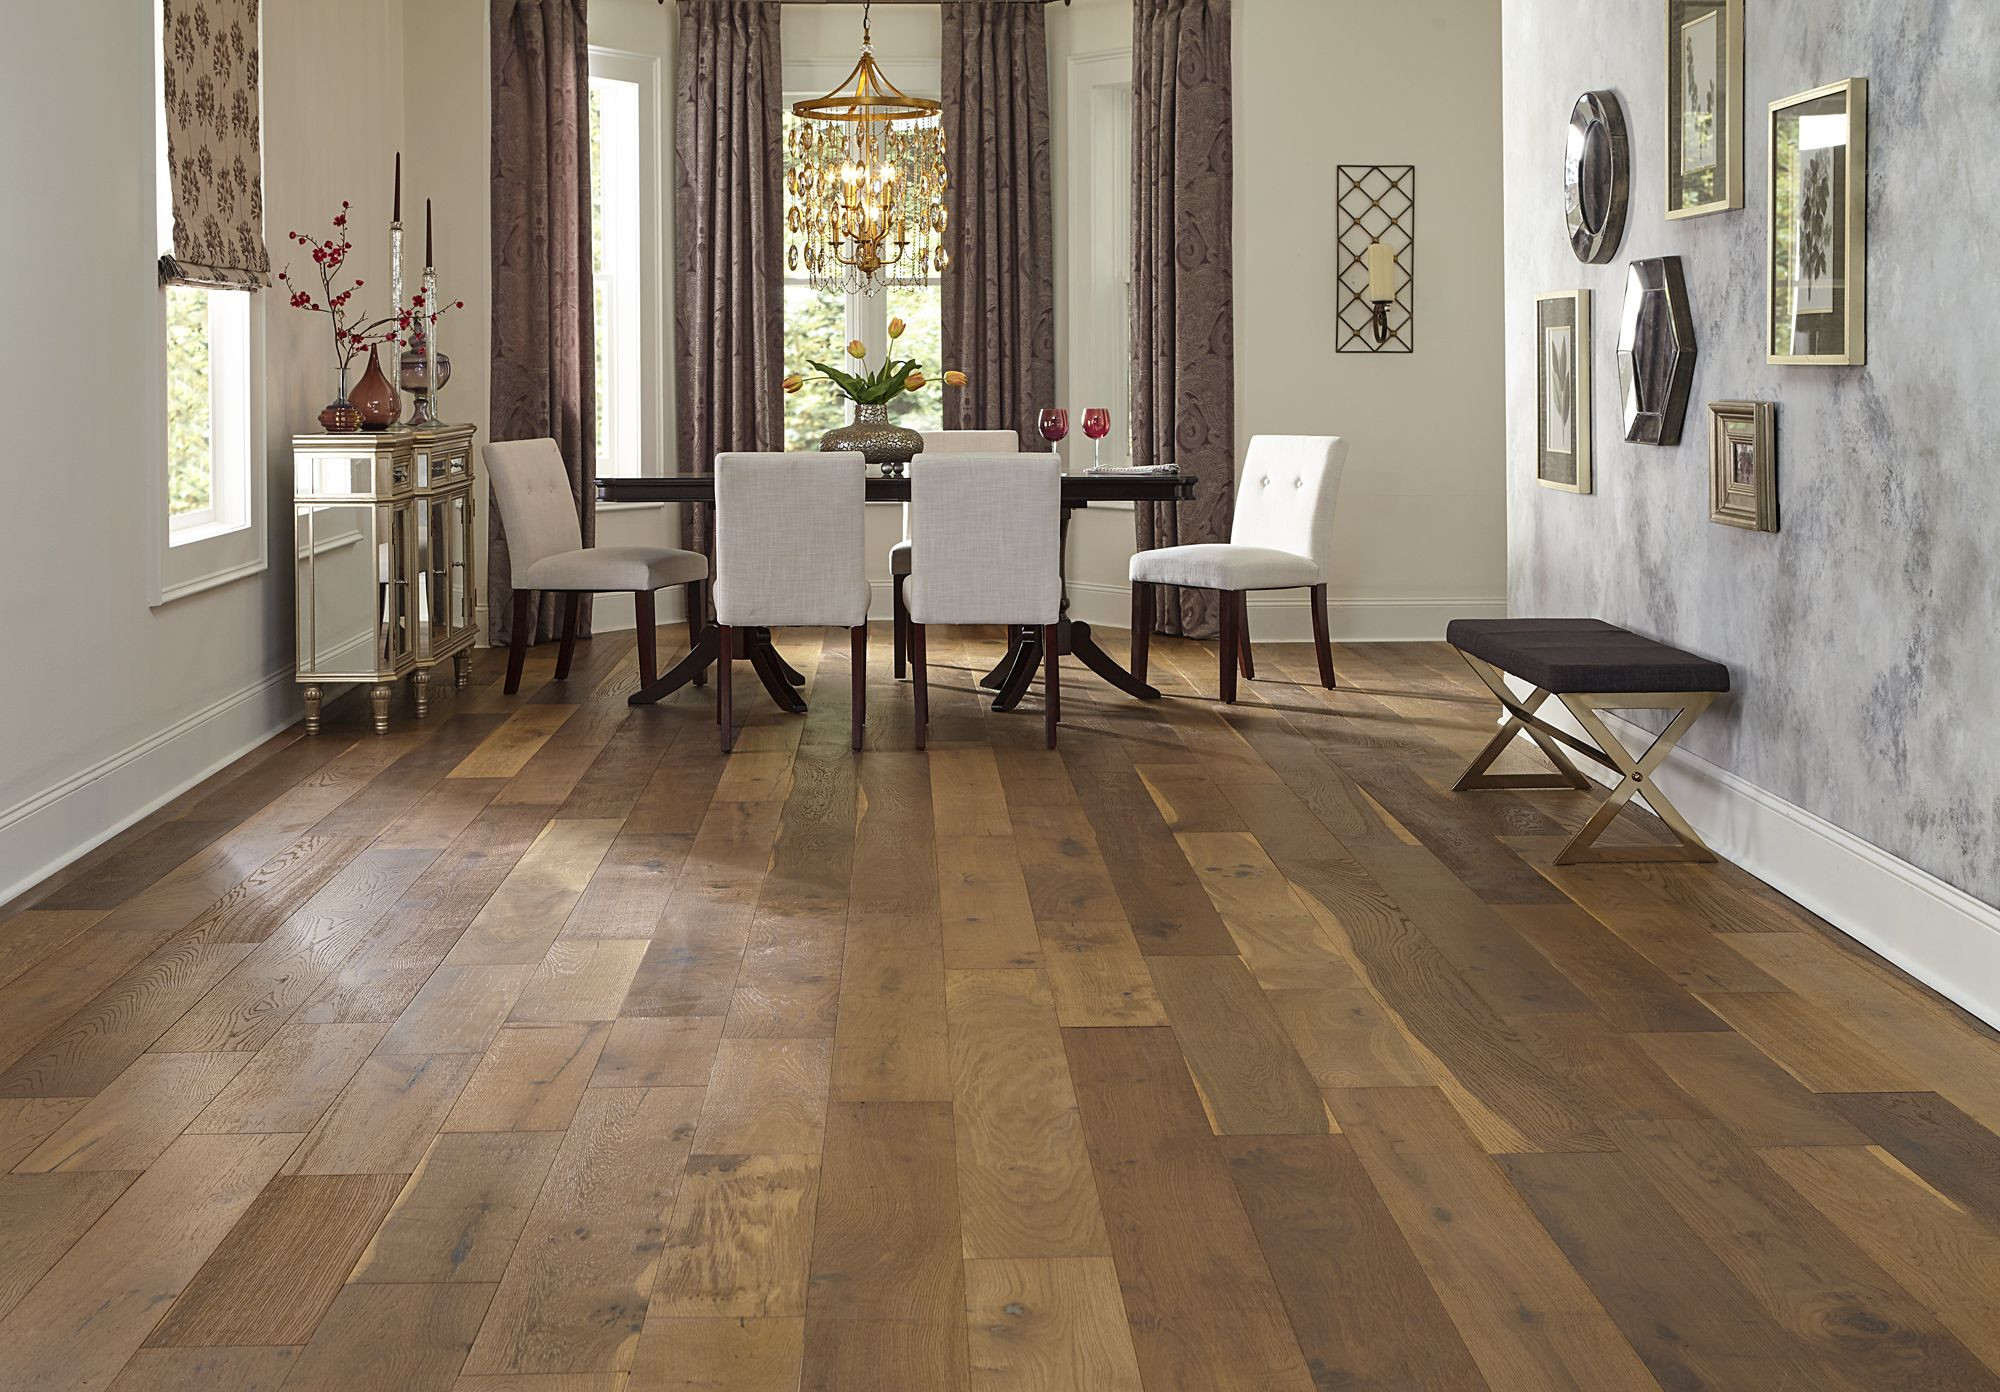 26 Recommended Hardwood Flooring Stores In Dalton Ga 2024 free download hardwood flooring stores in dalton ga of 7 1 2 wide planks and a rustic look bellawood willow manor oak has throughout 7 1 2 wide planks and a rustic look bellawood willow manor oak has a st